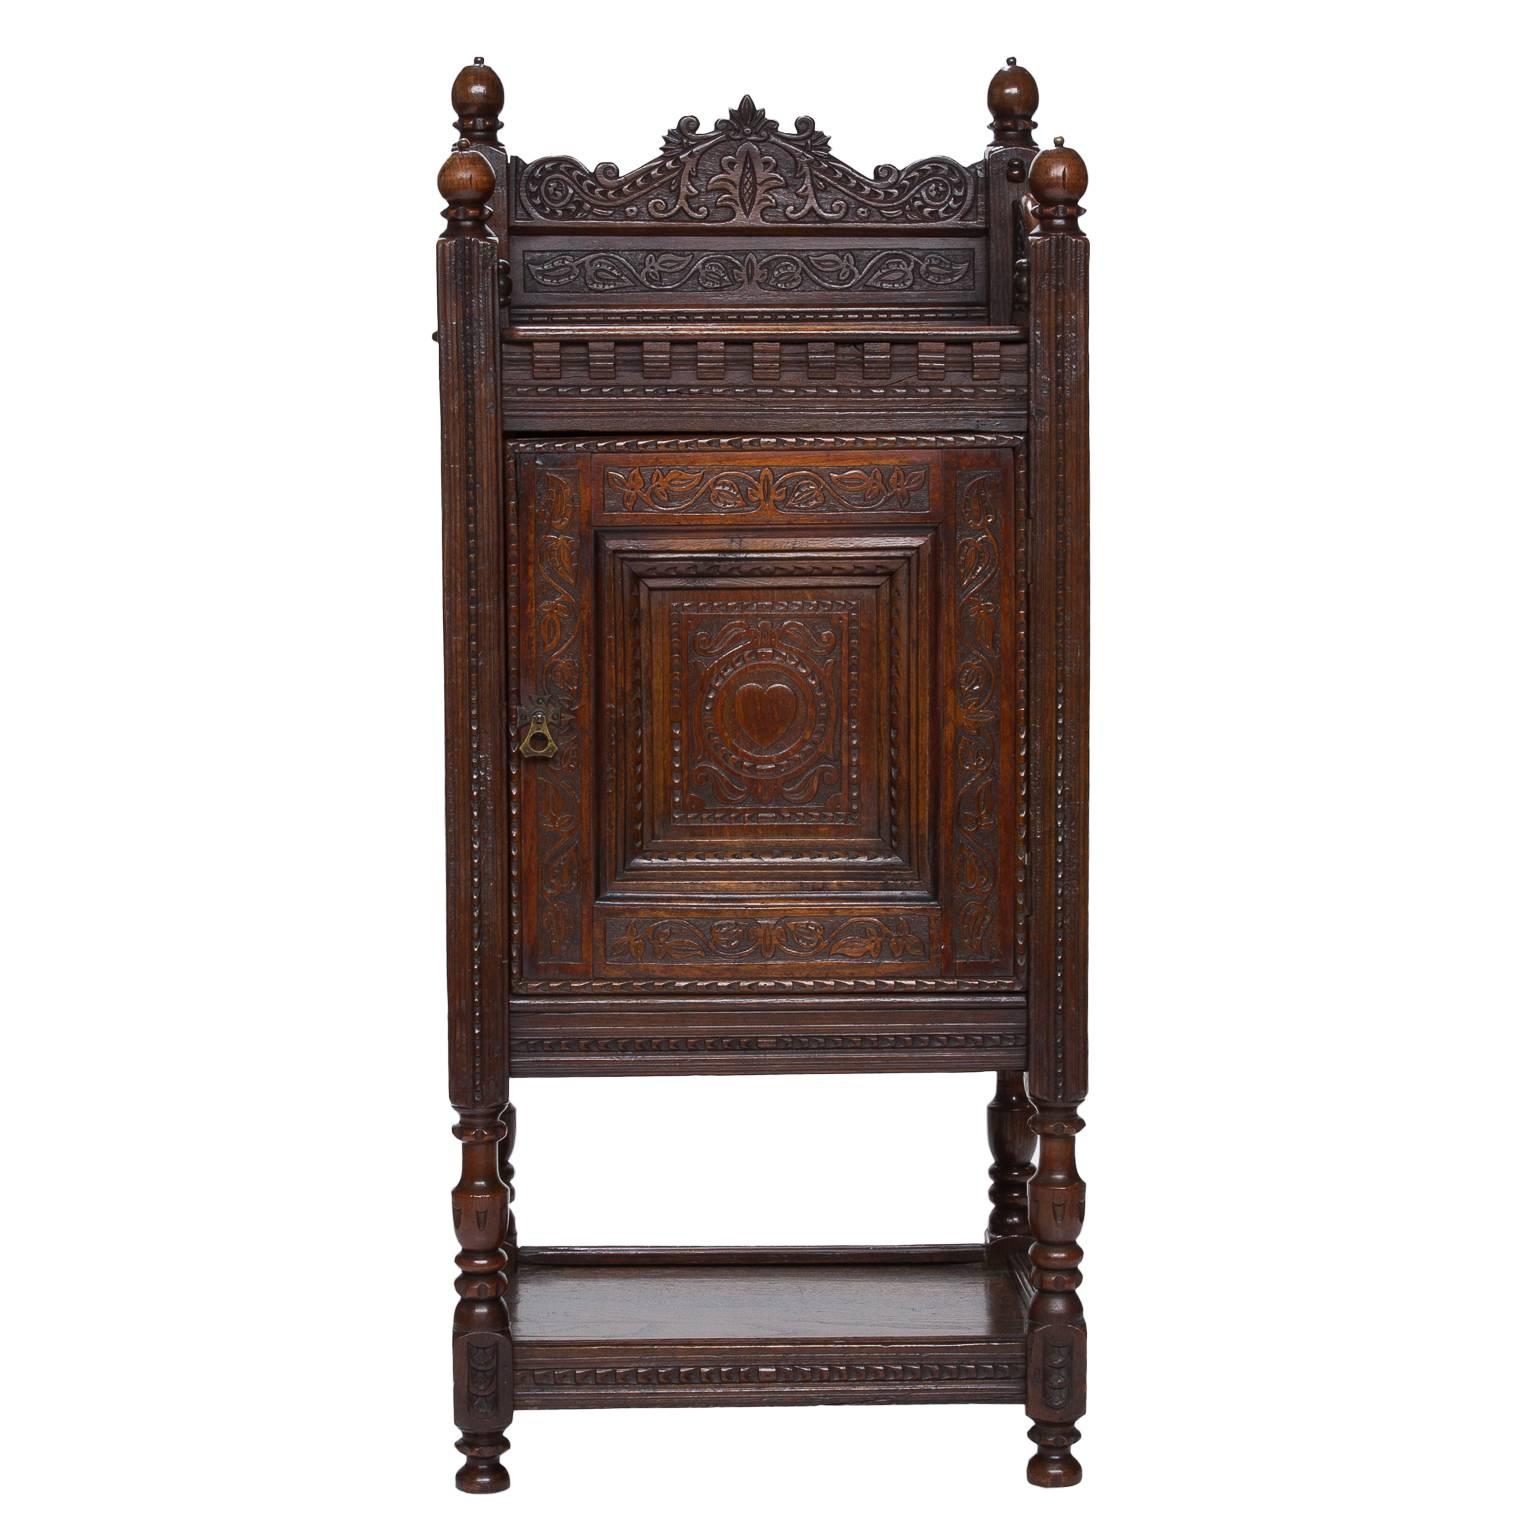 18th Century Cabinet from Burgundy Region of France